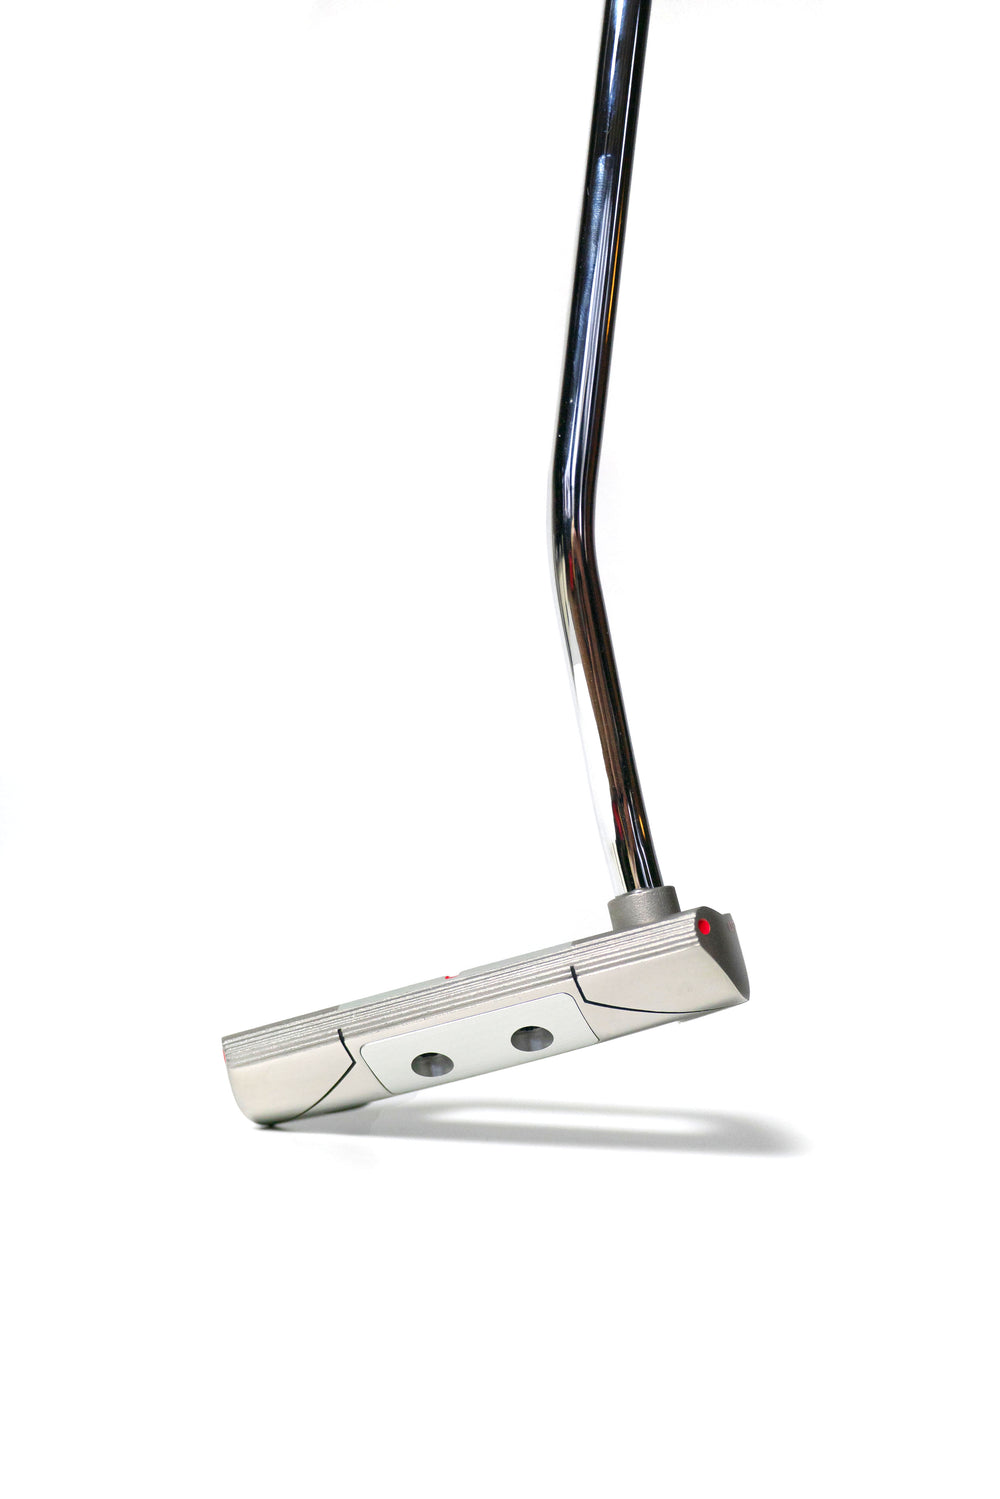 face of the Spoiler Putter at a vertical view